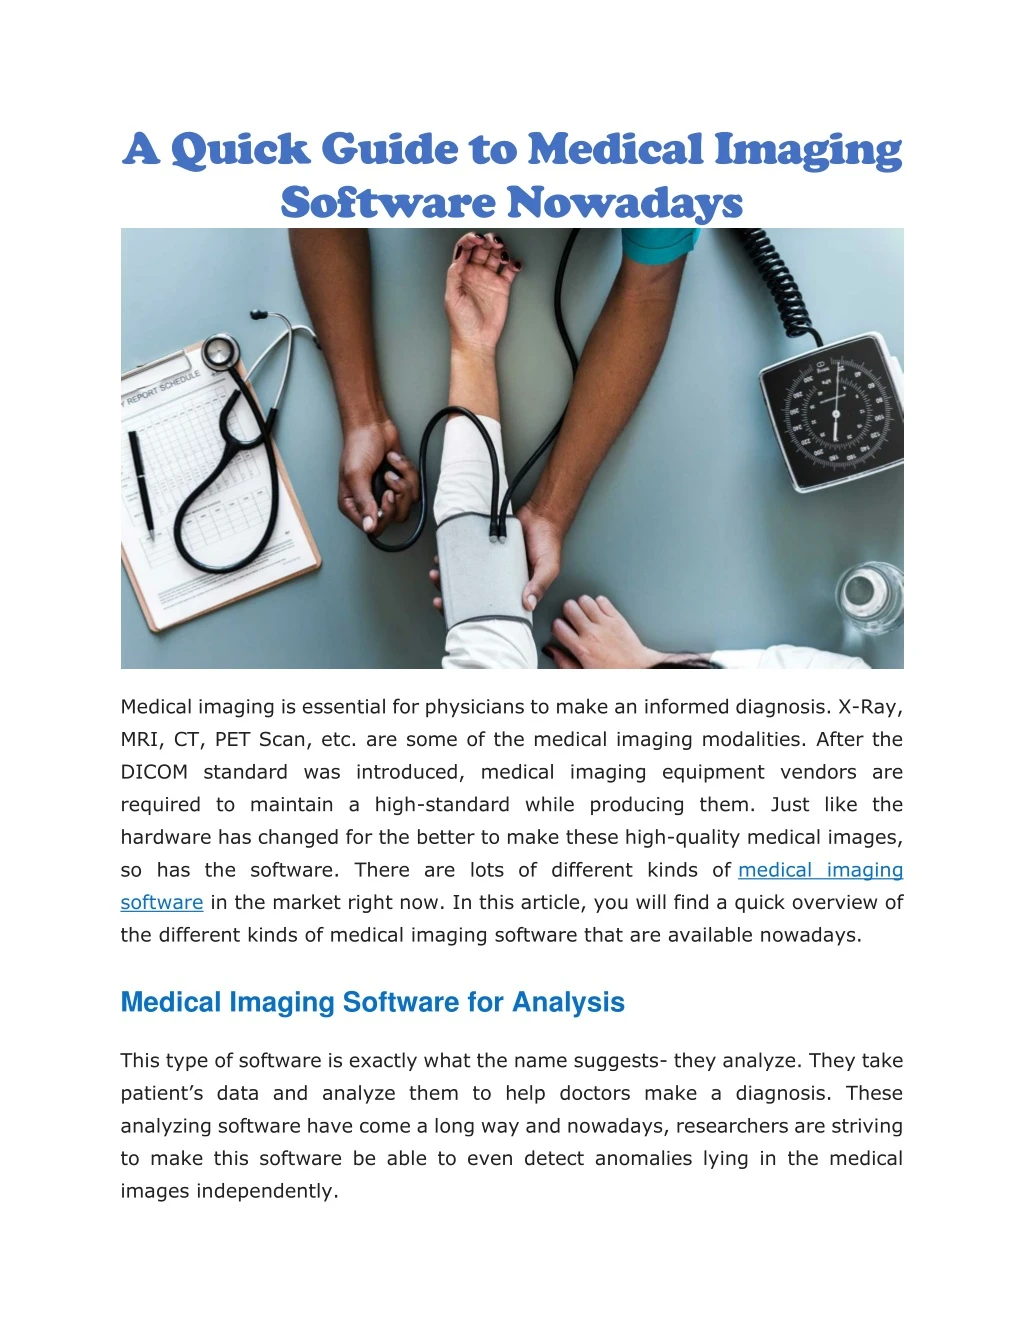 a quick guide to medical imaging software nowadays